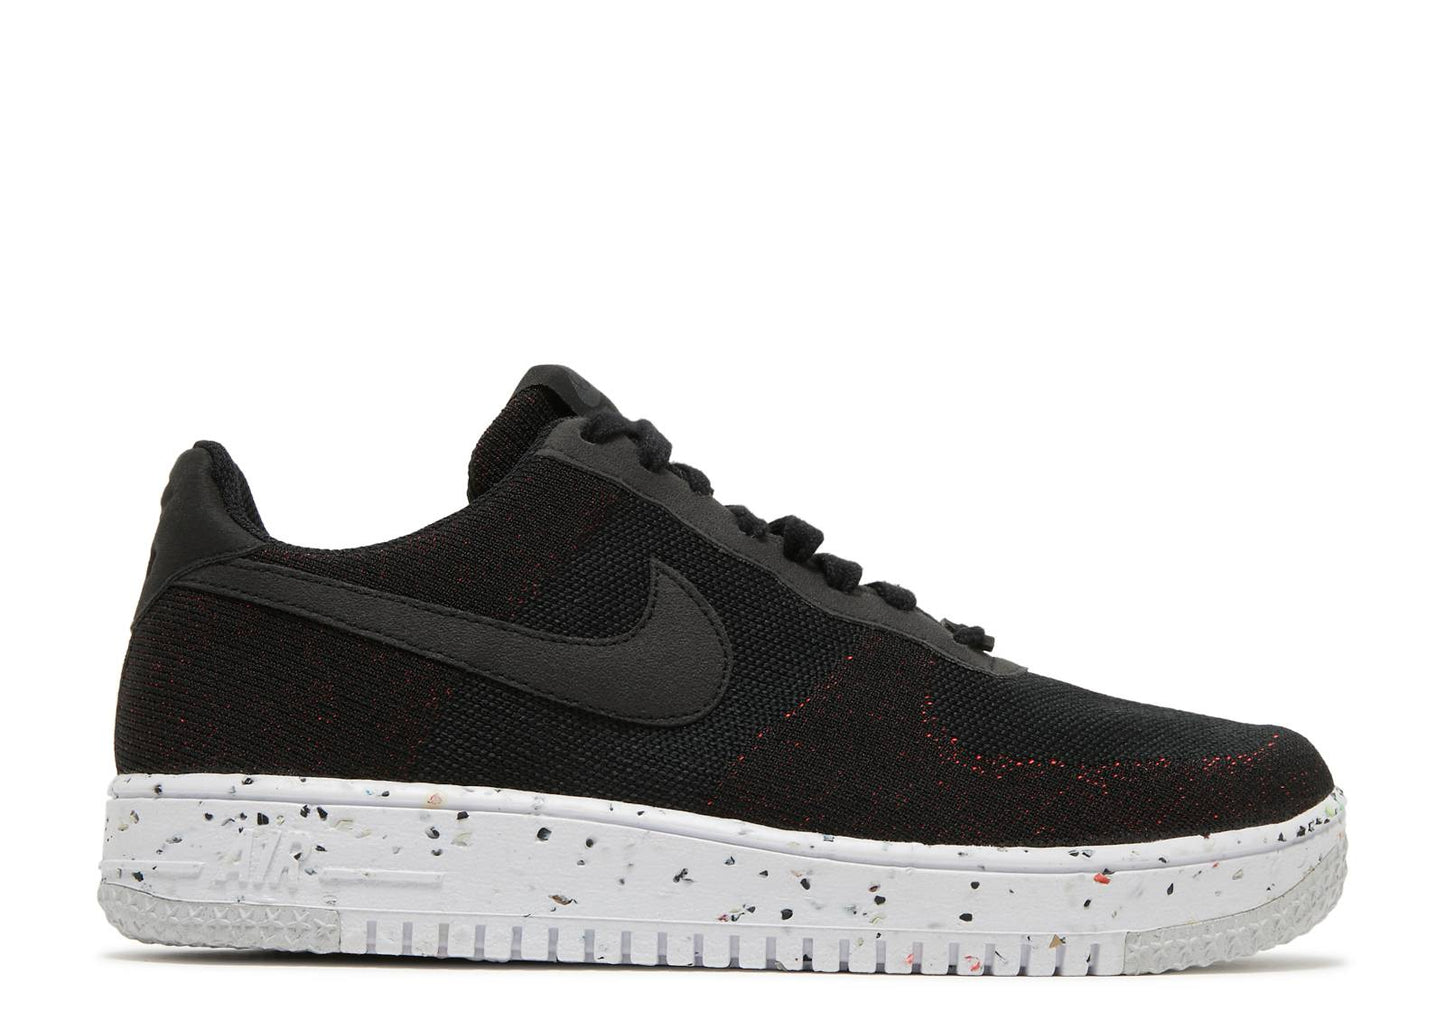 Nike Air Force 1 Low Crater Flyknit "Black/White"